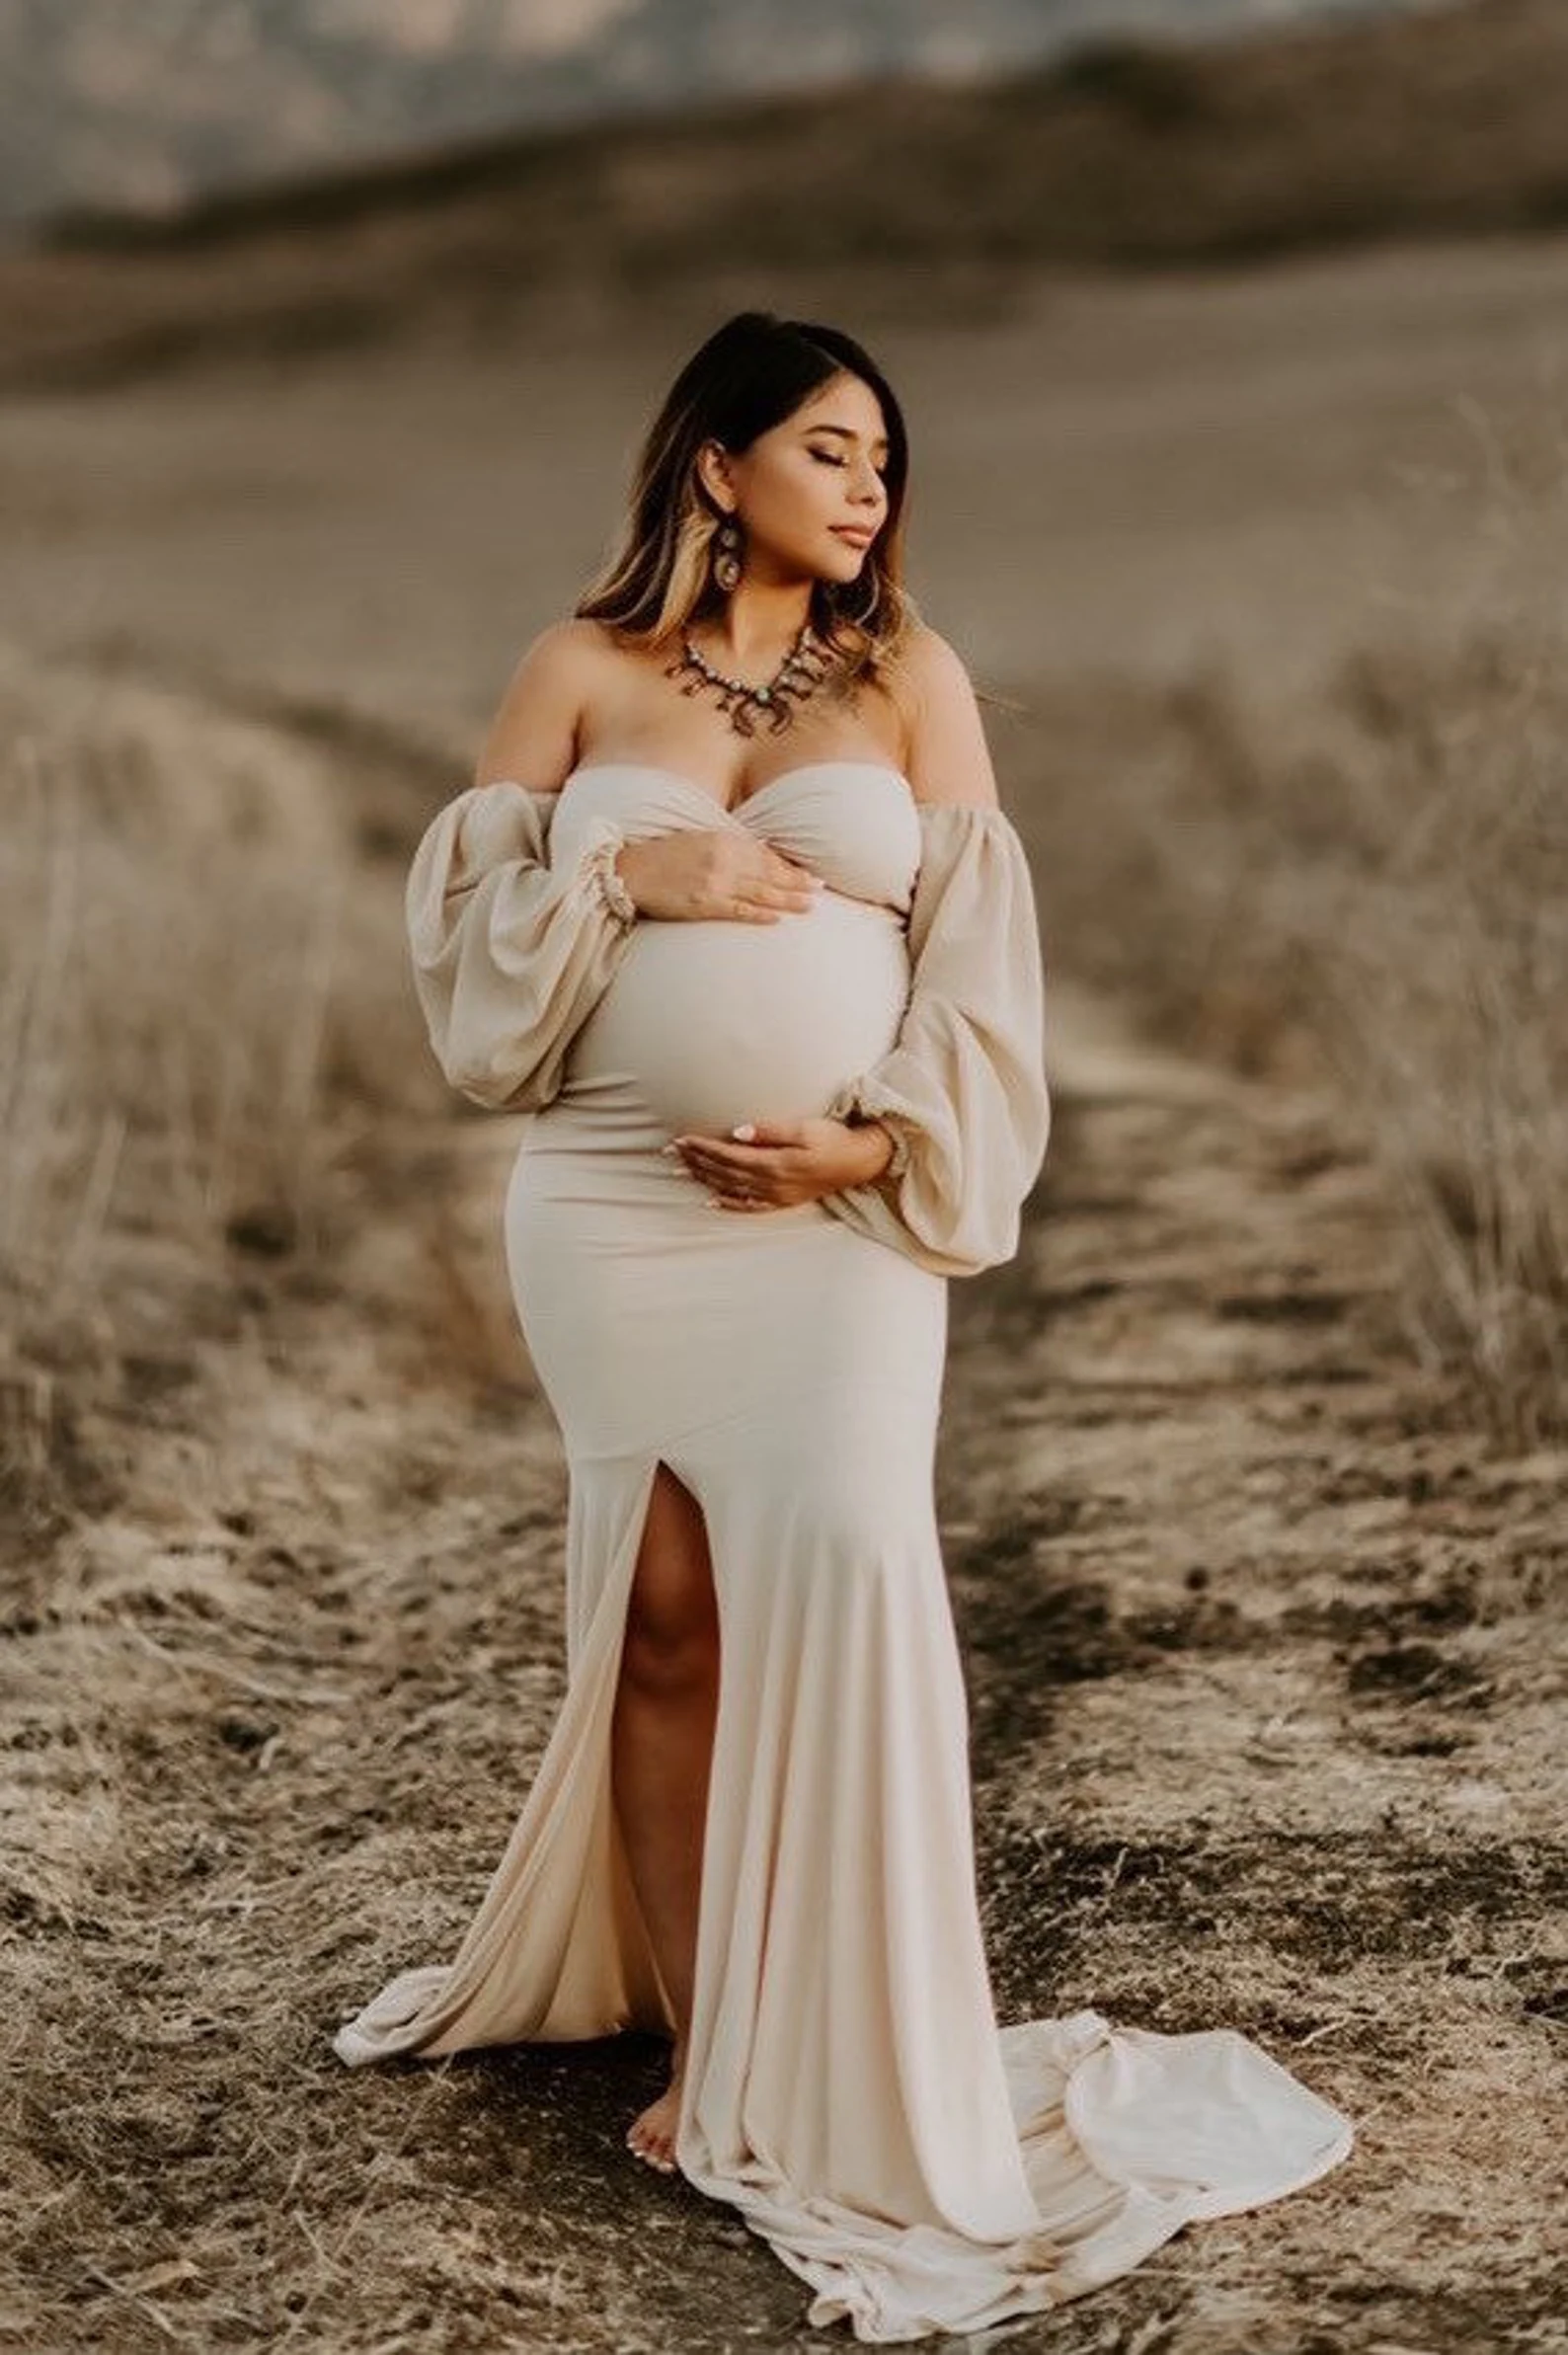 The Best White Maternity Dresses for Your Photoshoot - Studio 29